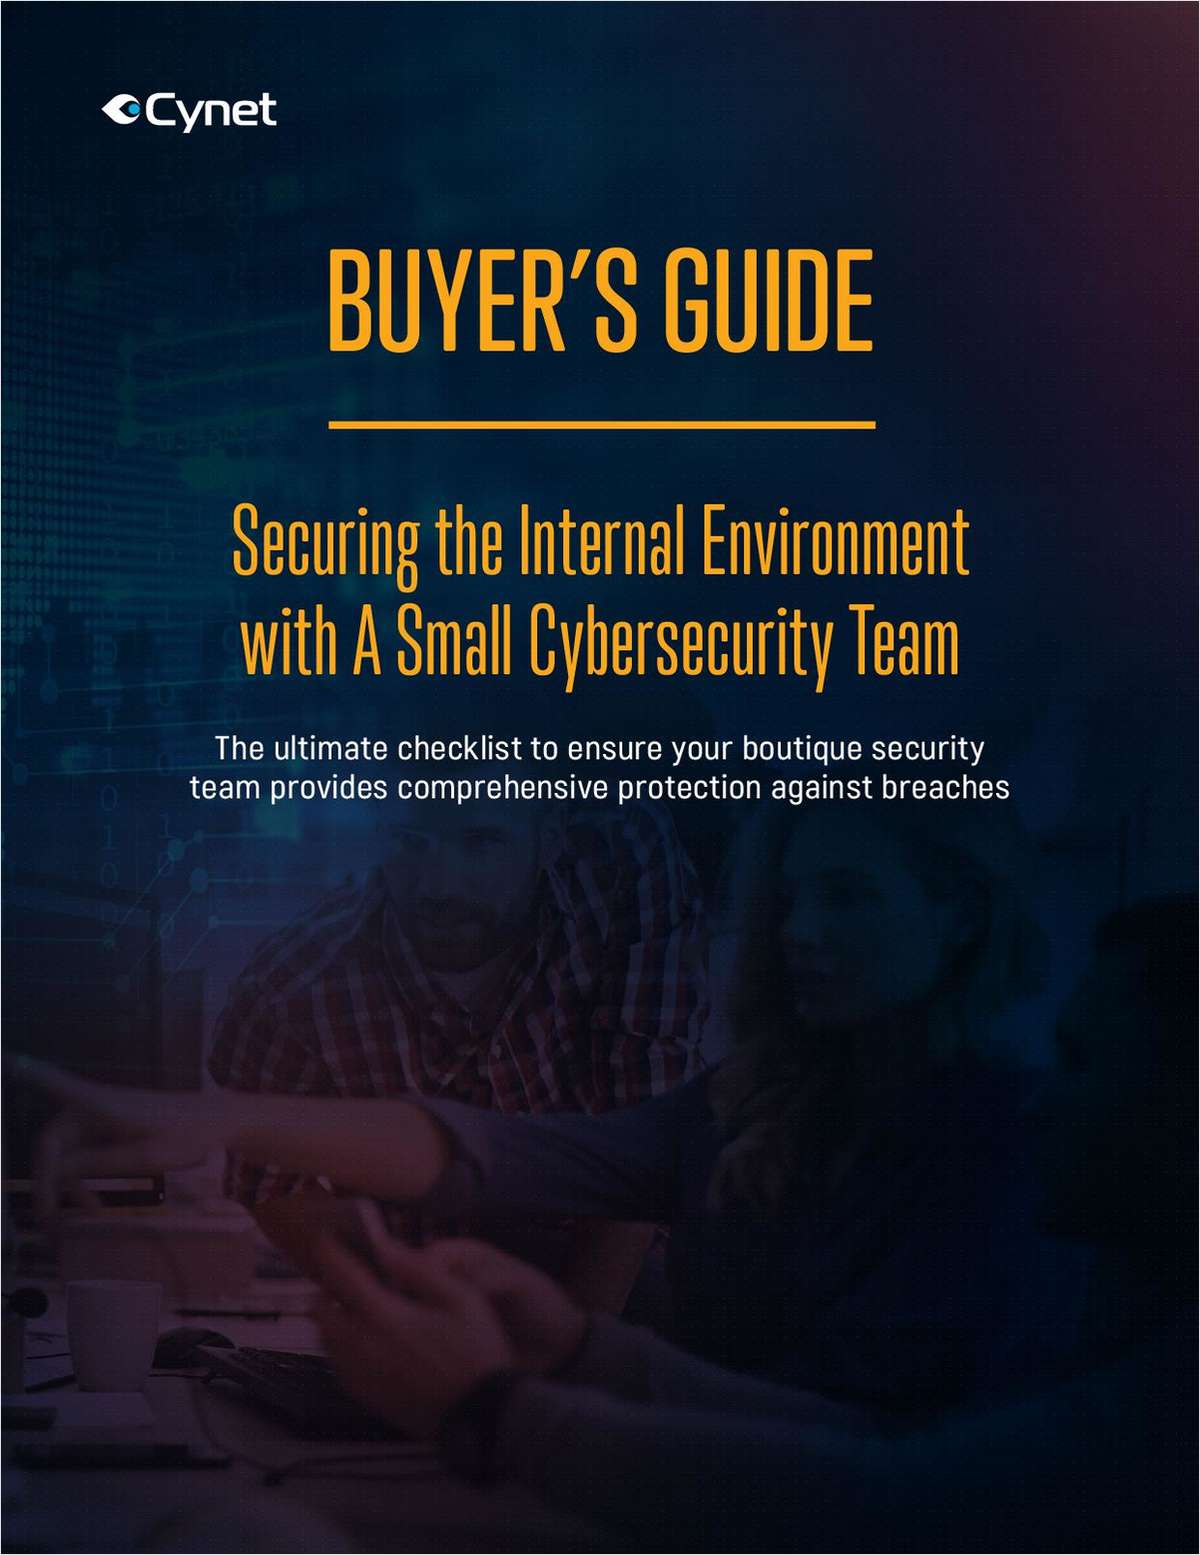 THE BUYER'S GUIDE FOR SECURING THE INTERNAL ENVIRONMENT WITH A SMALL CYBERSECURITY TEAM